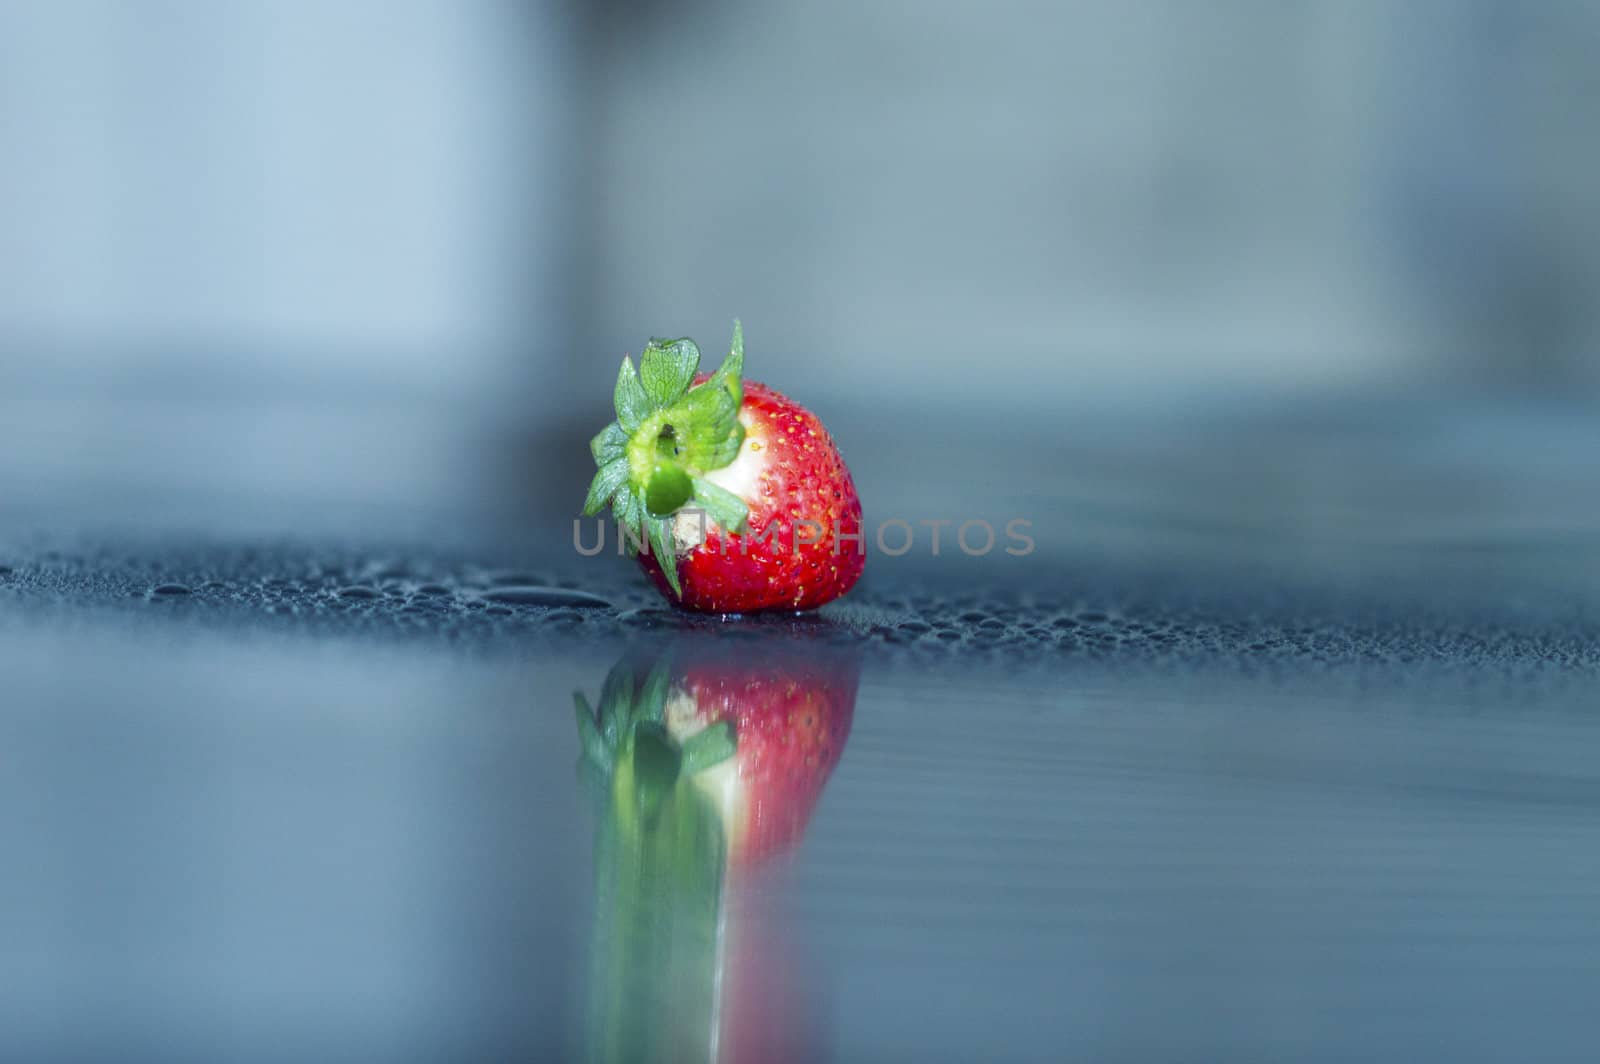 strawberry in drop of water by Avialle